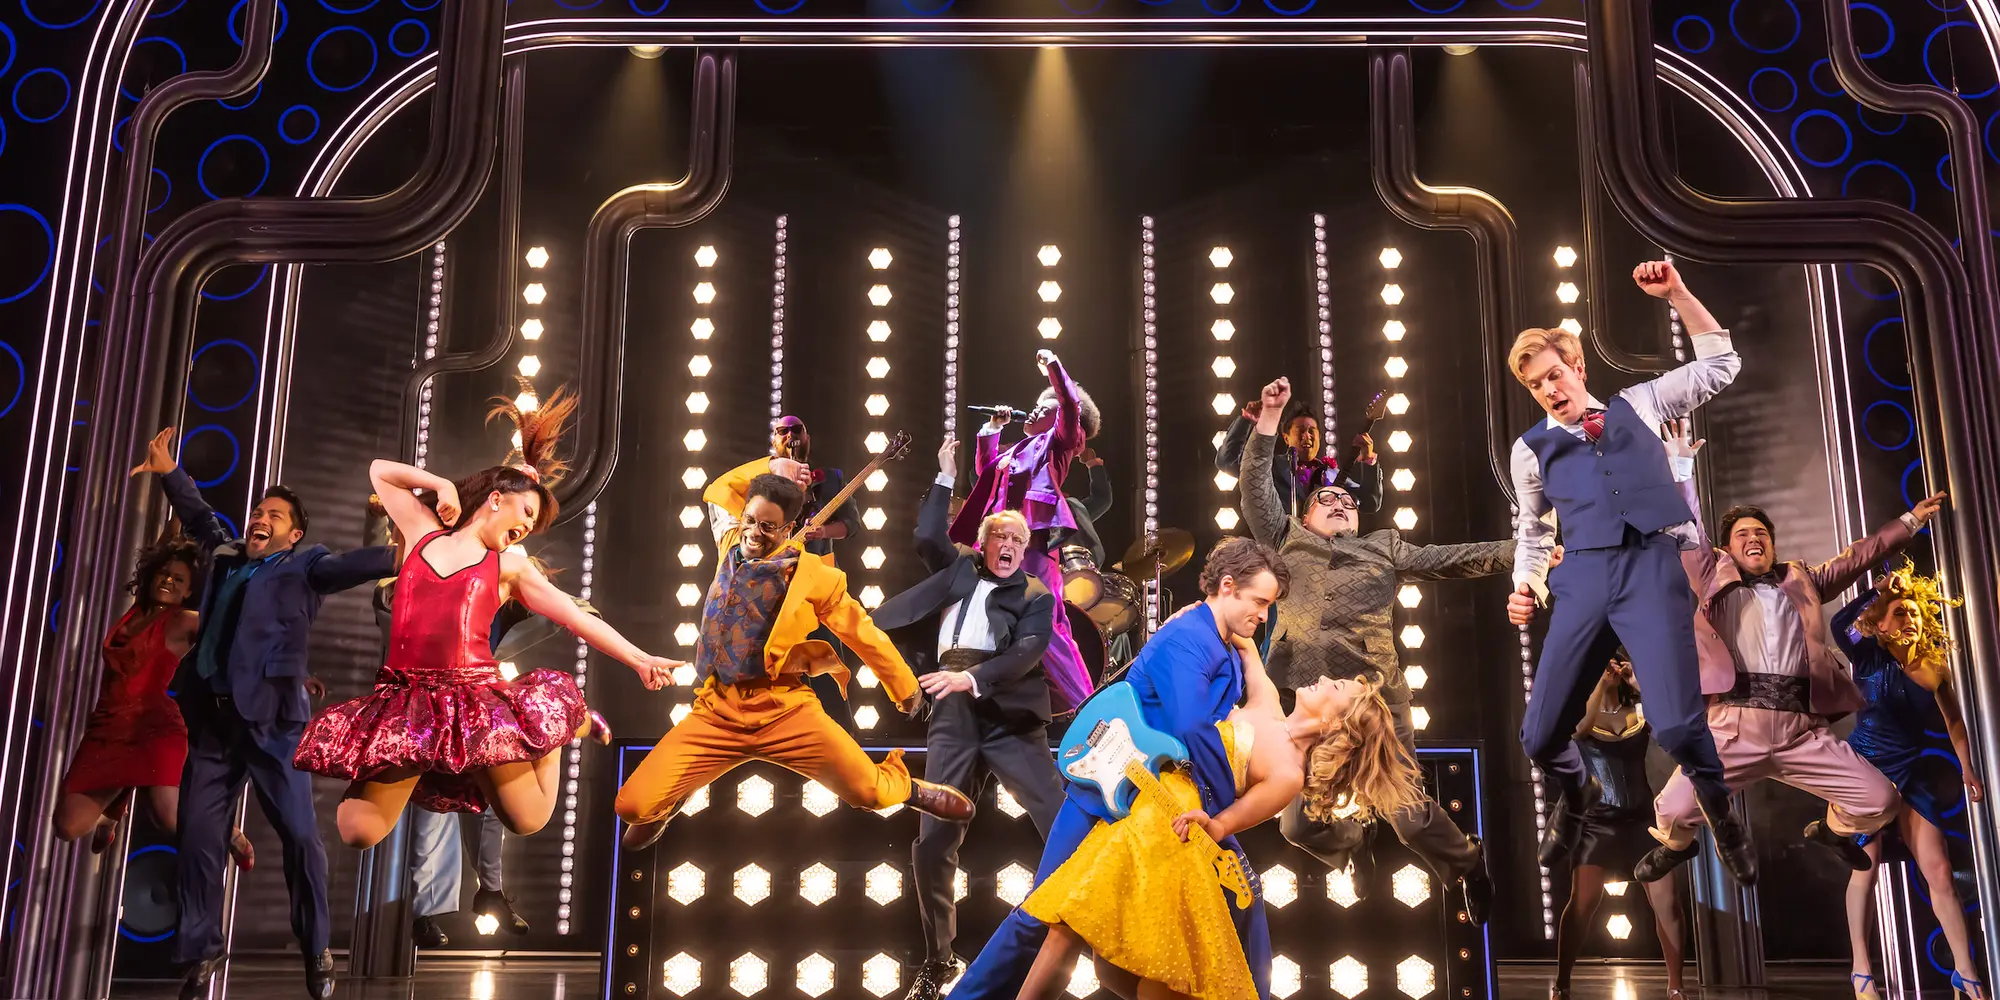 On a stage, a man in a blue suit with a guitar on his back dips a blonde woman in a yellow dress, meanwhile behind them, a cast of about a dozen people in brightly colored '80s clothing are frozen mid-jump in a dance number in front of a set comprised of rows of white lights. 